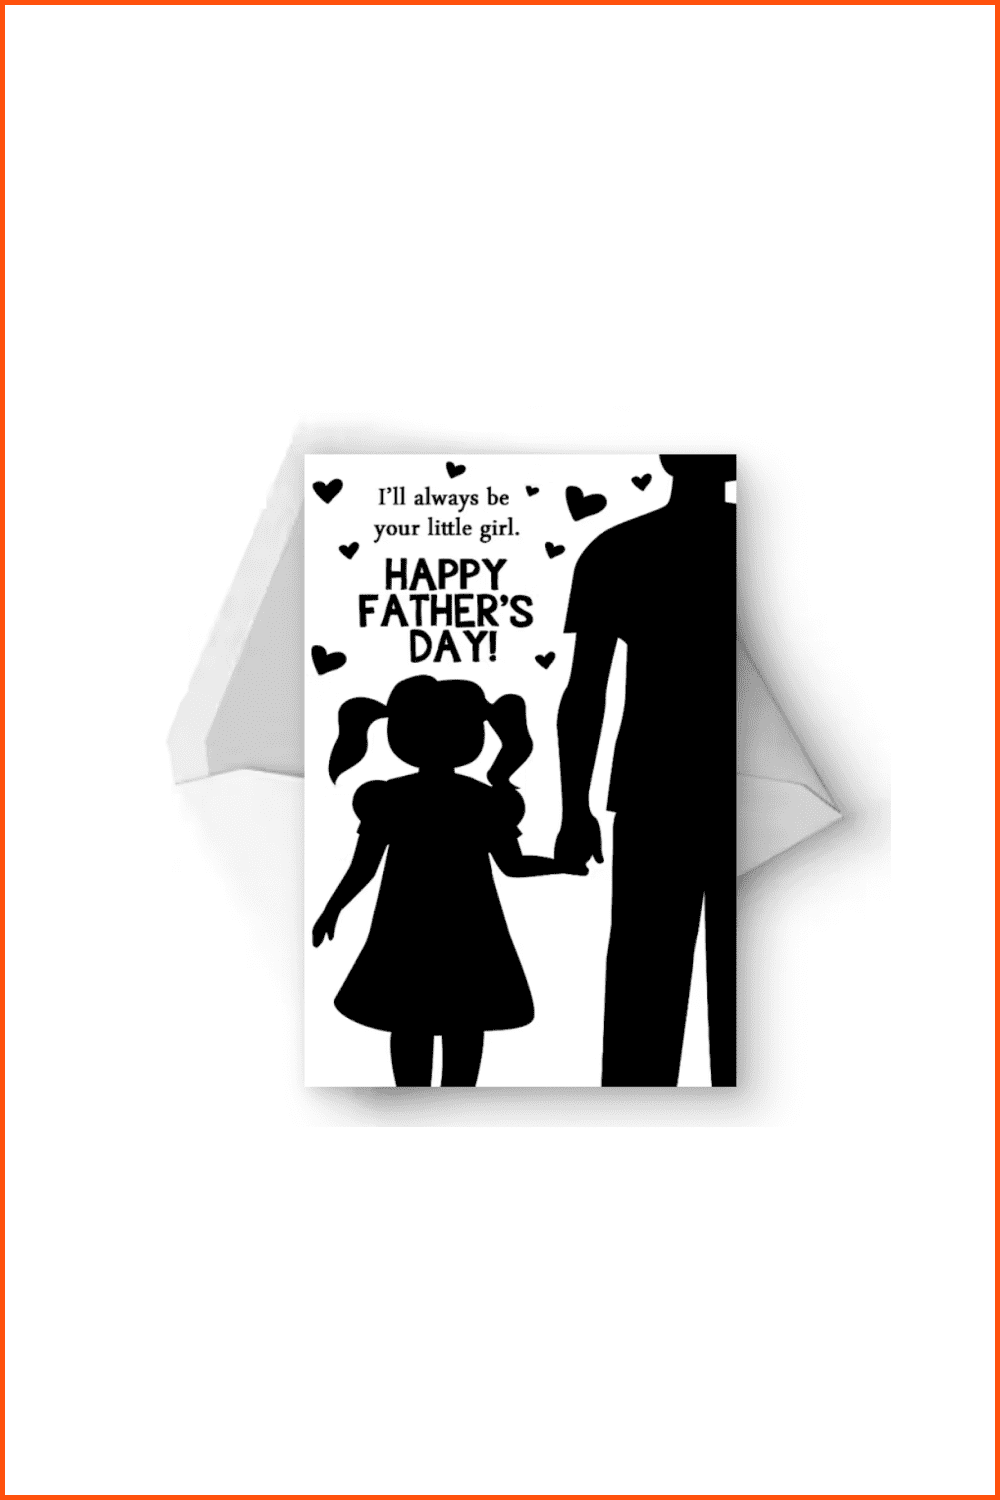 Your Little Girl – Father’s Day eCard from Greetings Island.